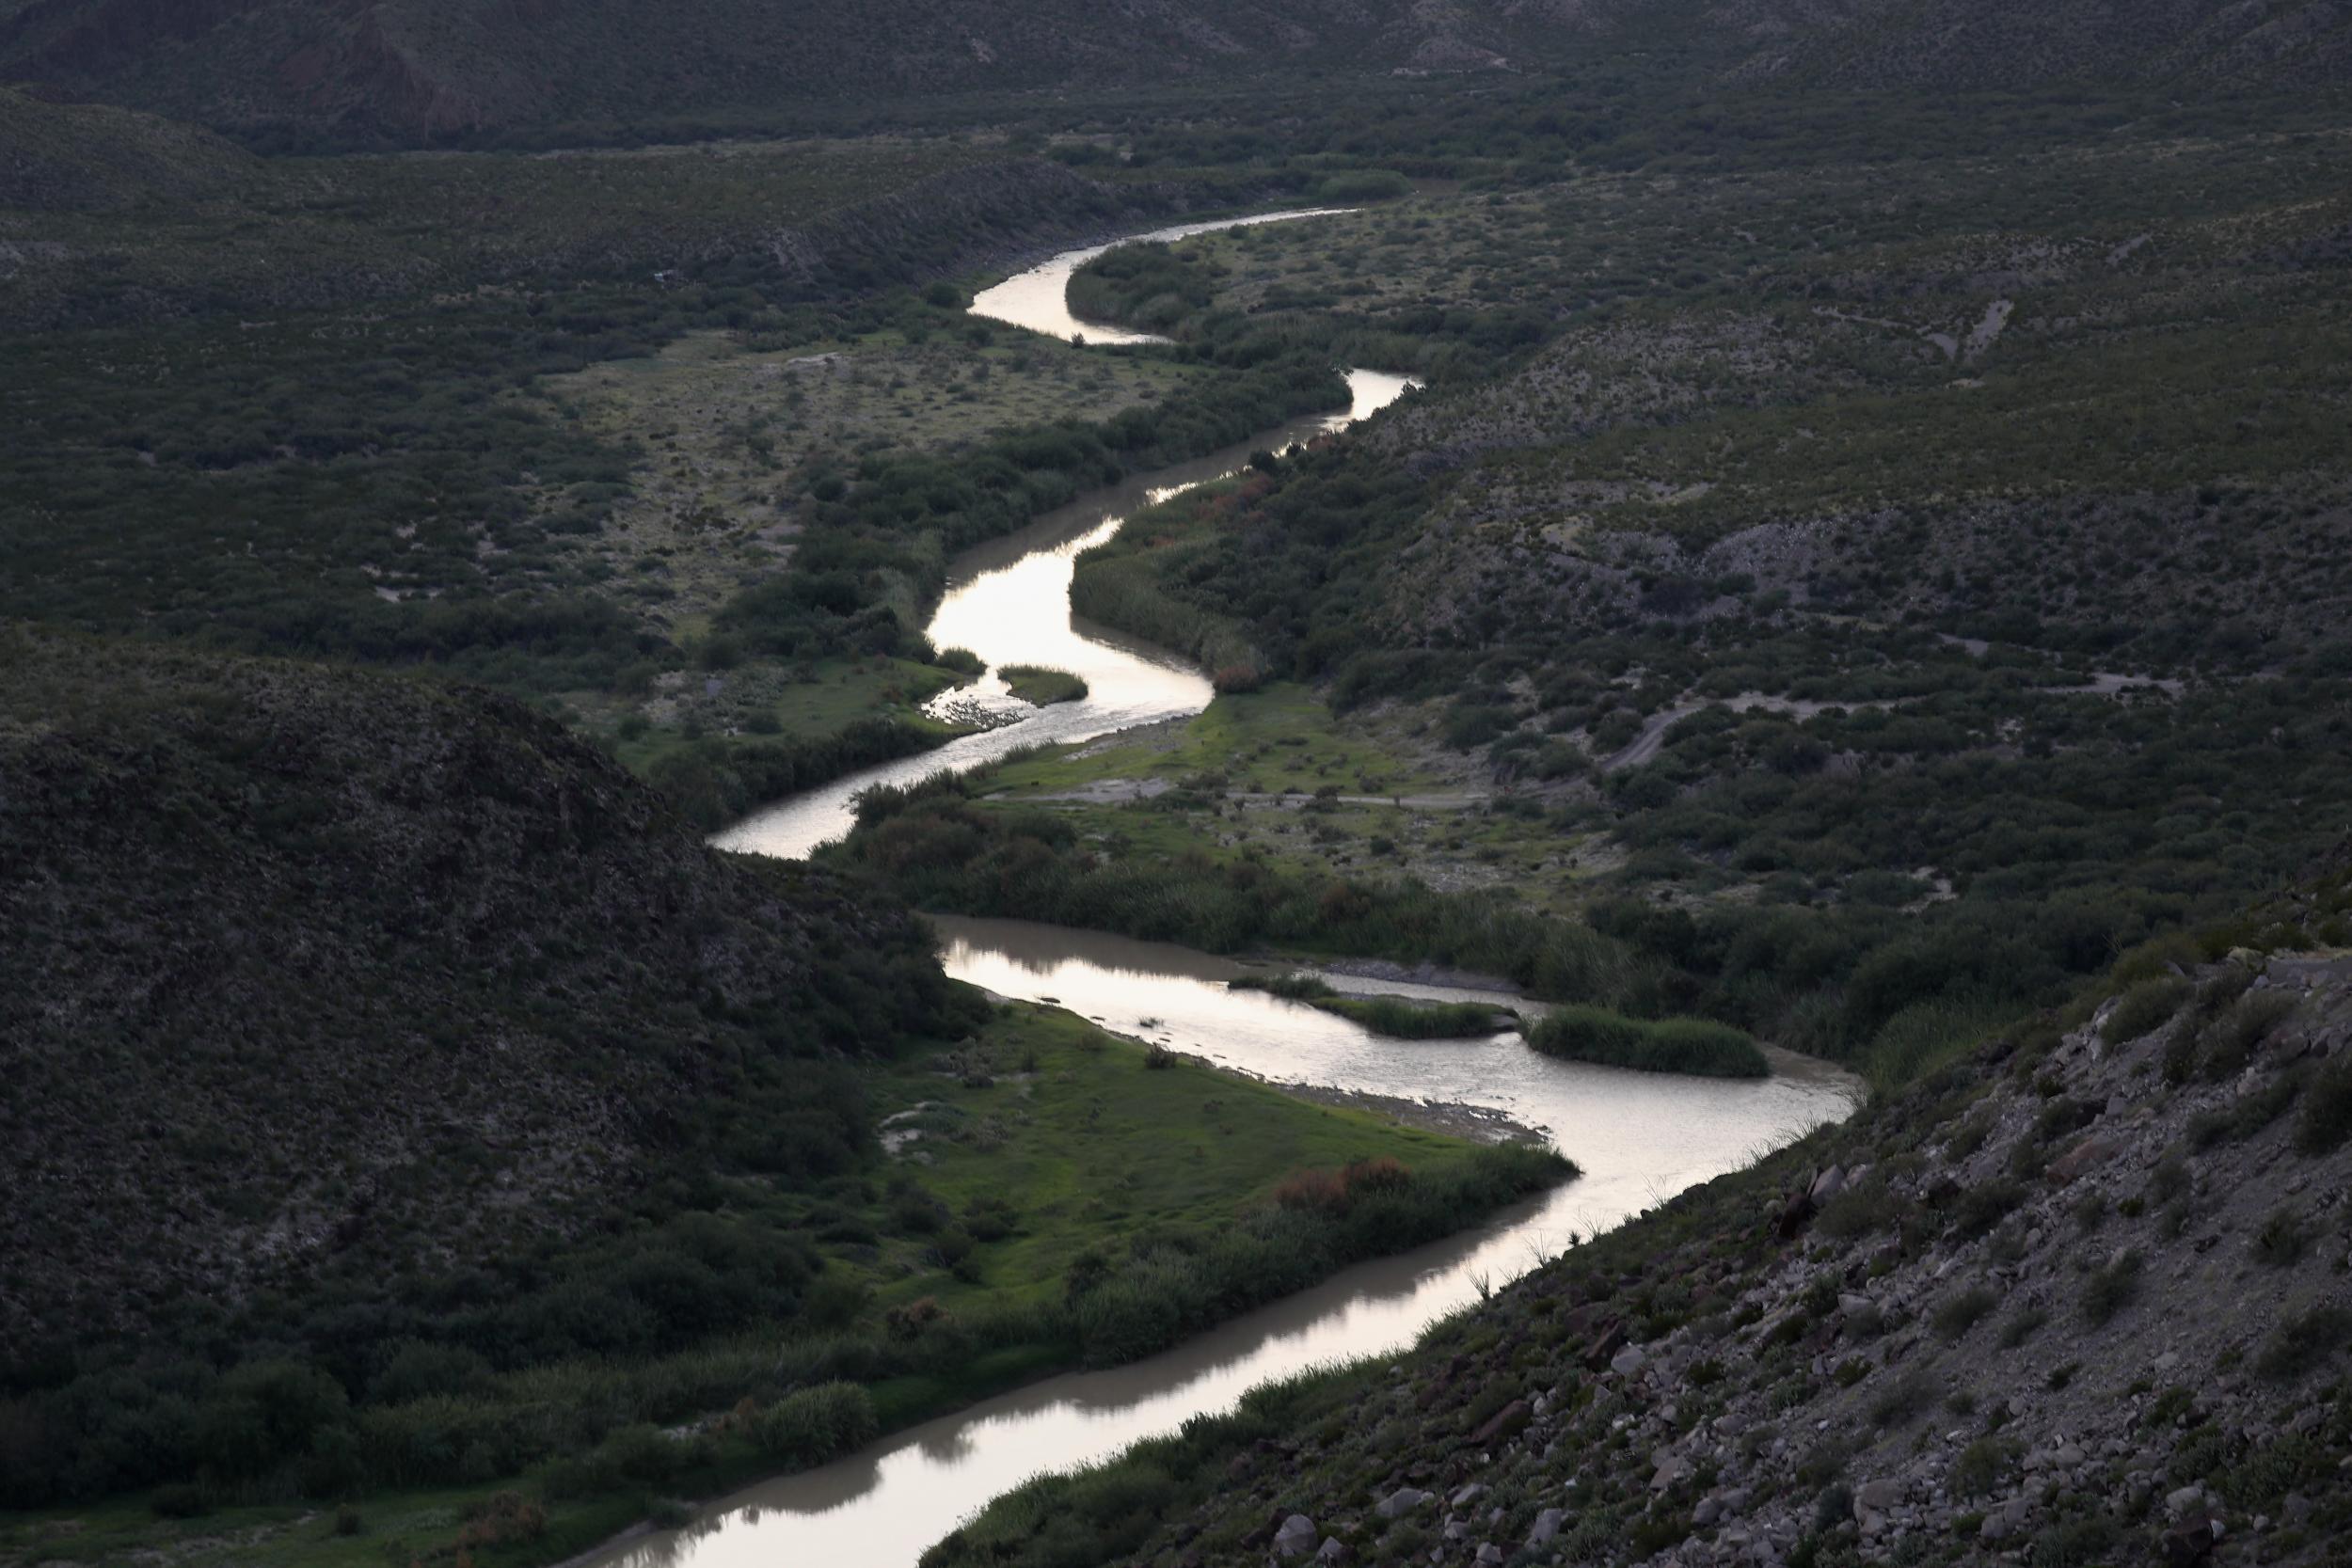 The Rio Grande forms a 1000-mile border between the US and Mexico. But it’ll take some engineering to build a wall along it